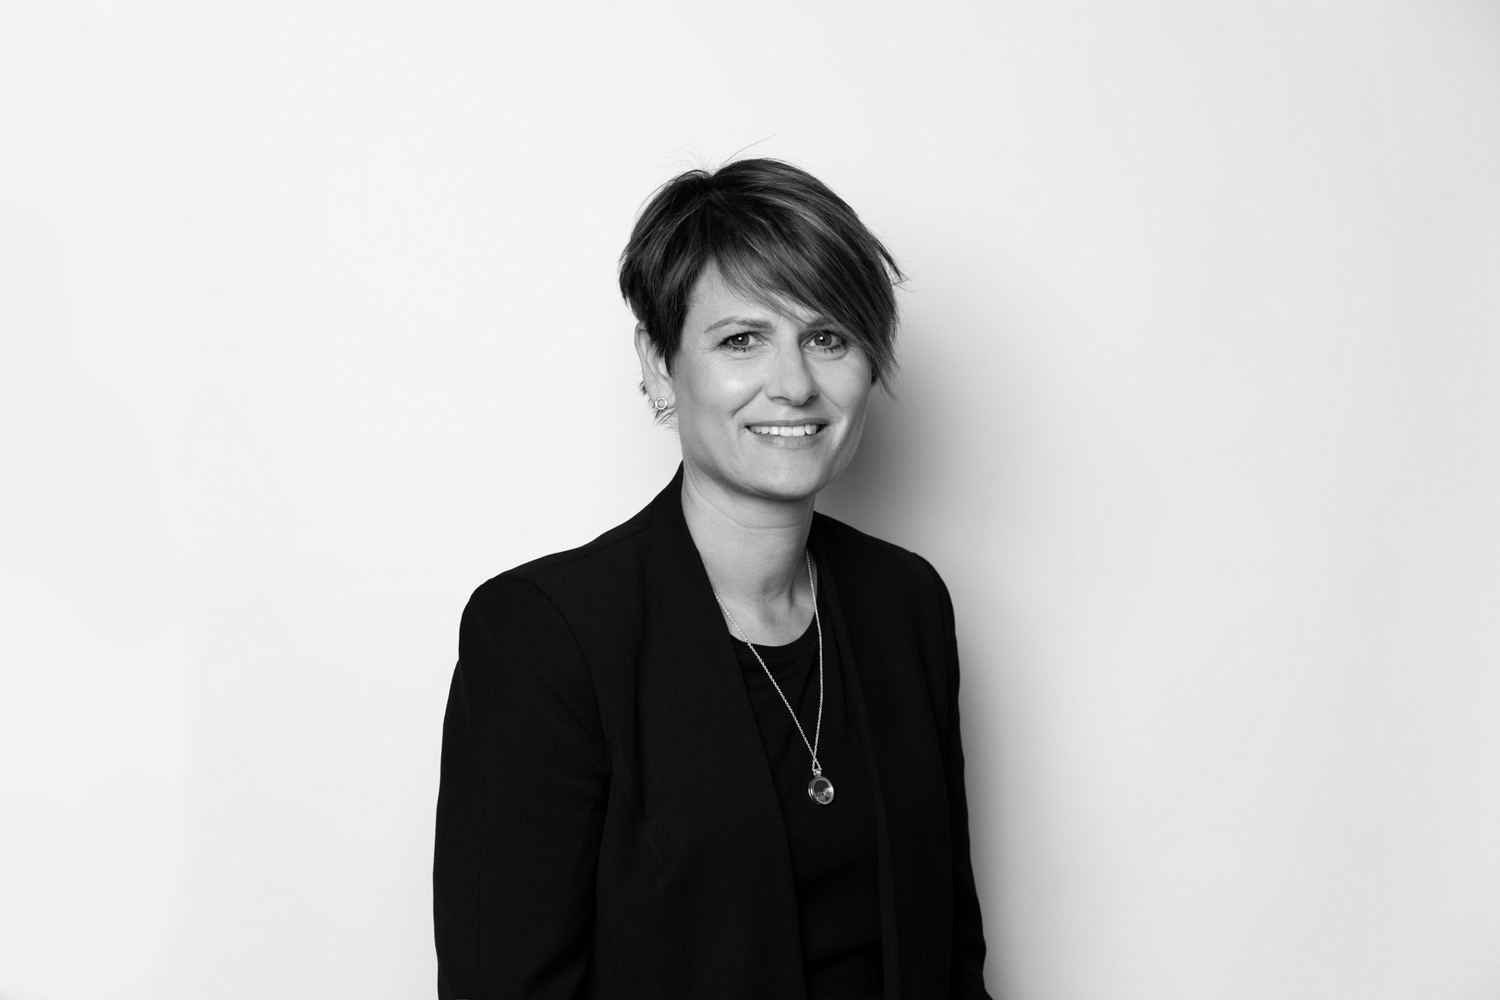 Headshot of Nicol Middel, Business Administration & Tenant Outcomes for Guardian Living Australia